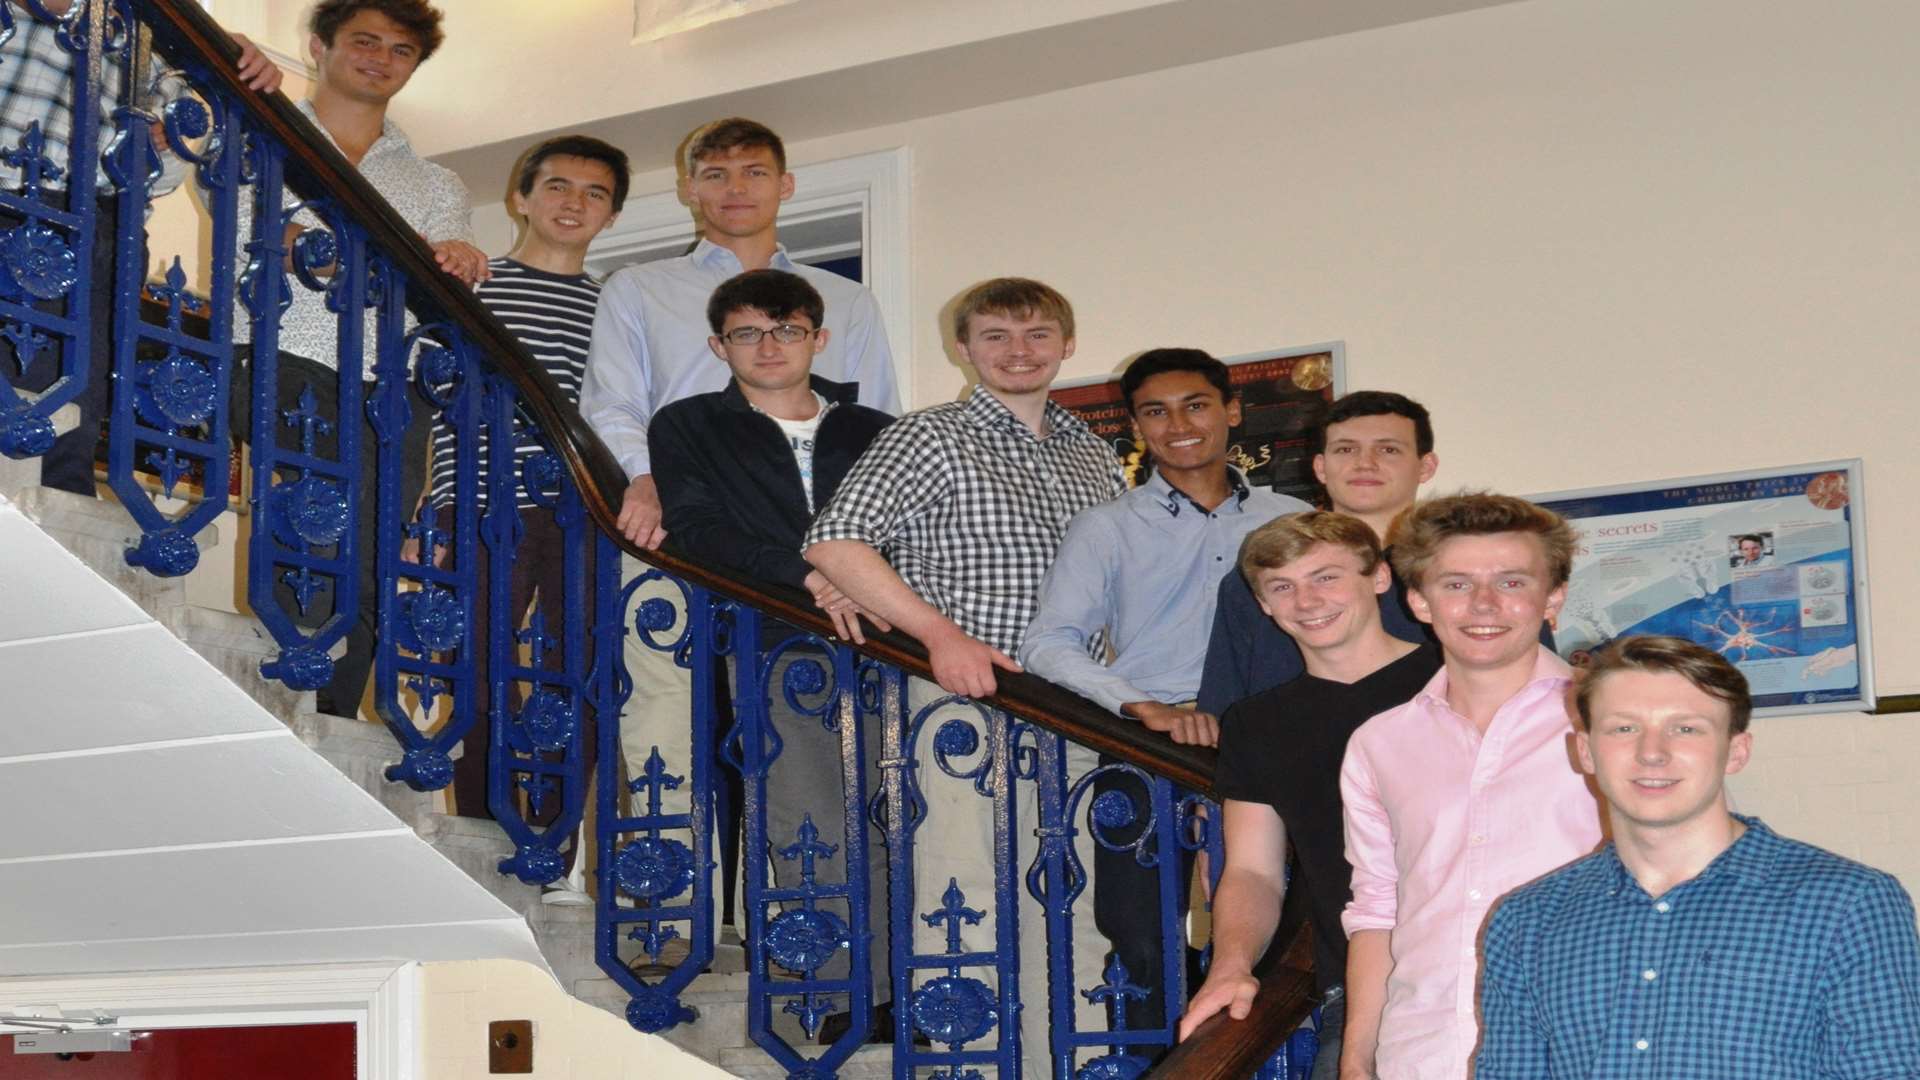 Some of the boys who achieved A* grades in all of their exams at Tonbridge School